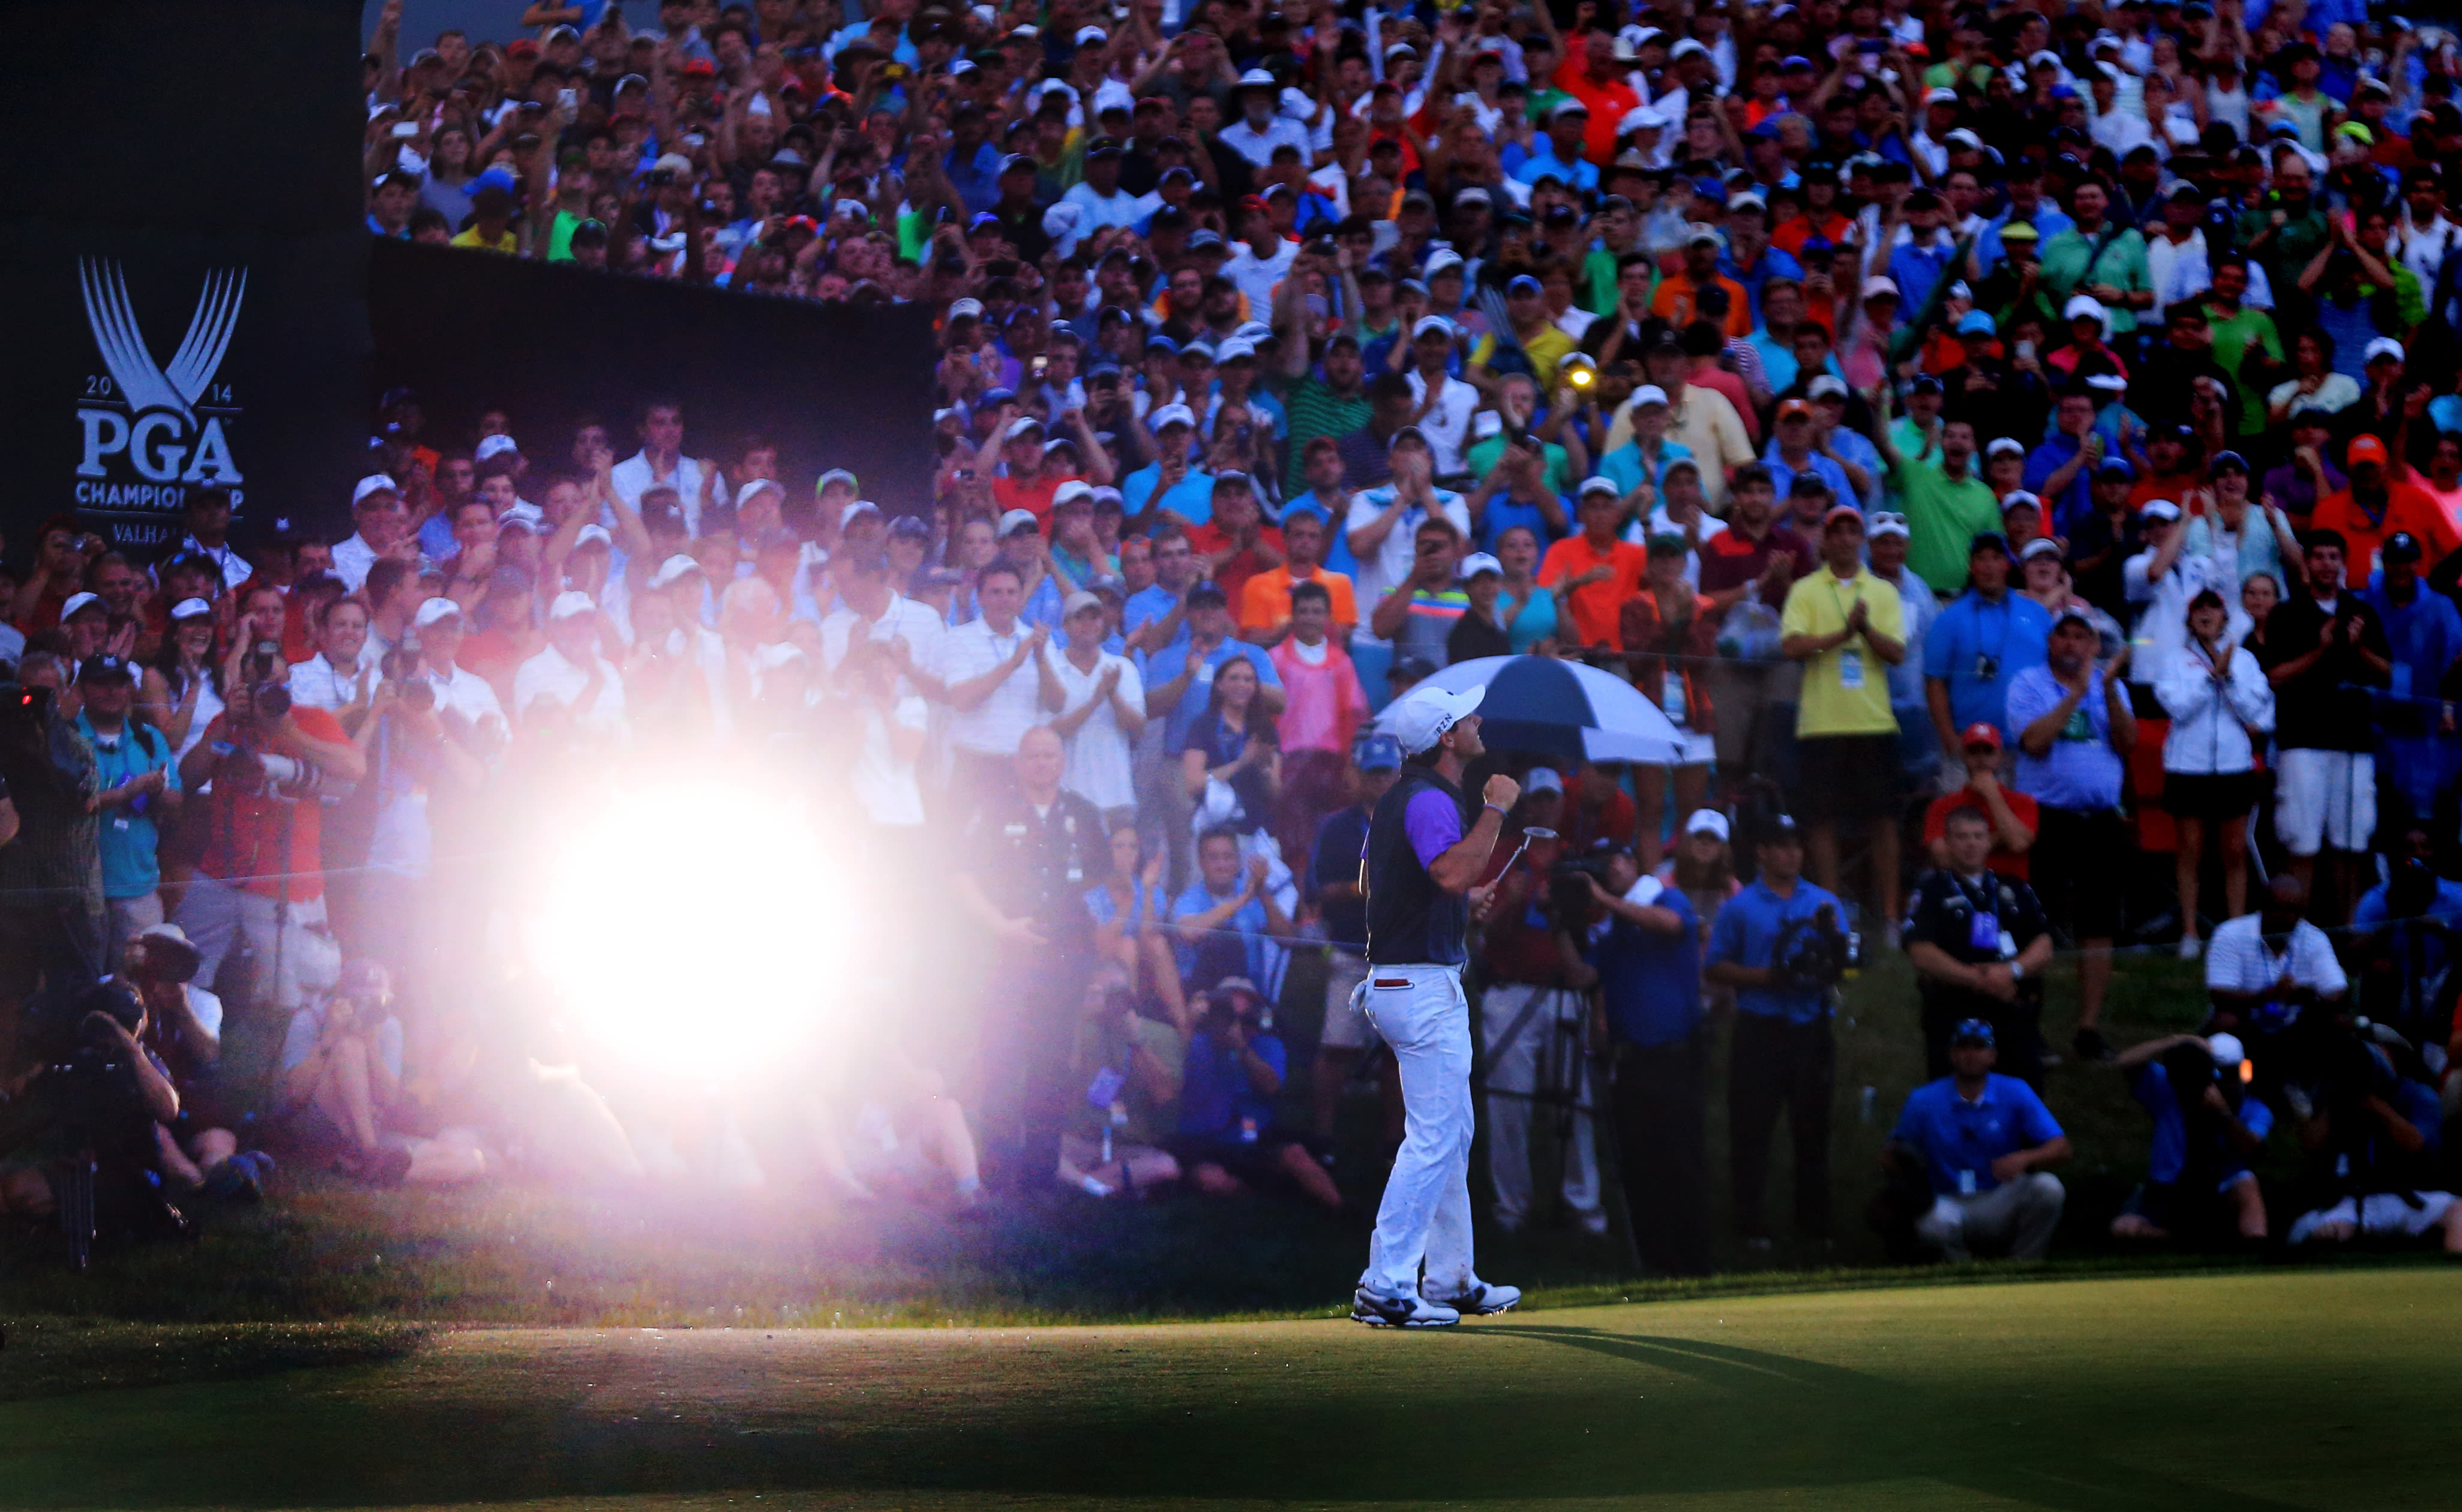 McIlroy on the 18th green after sinking the winning putt.